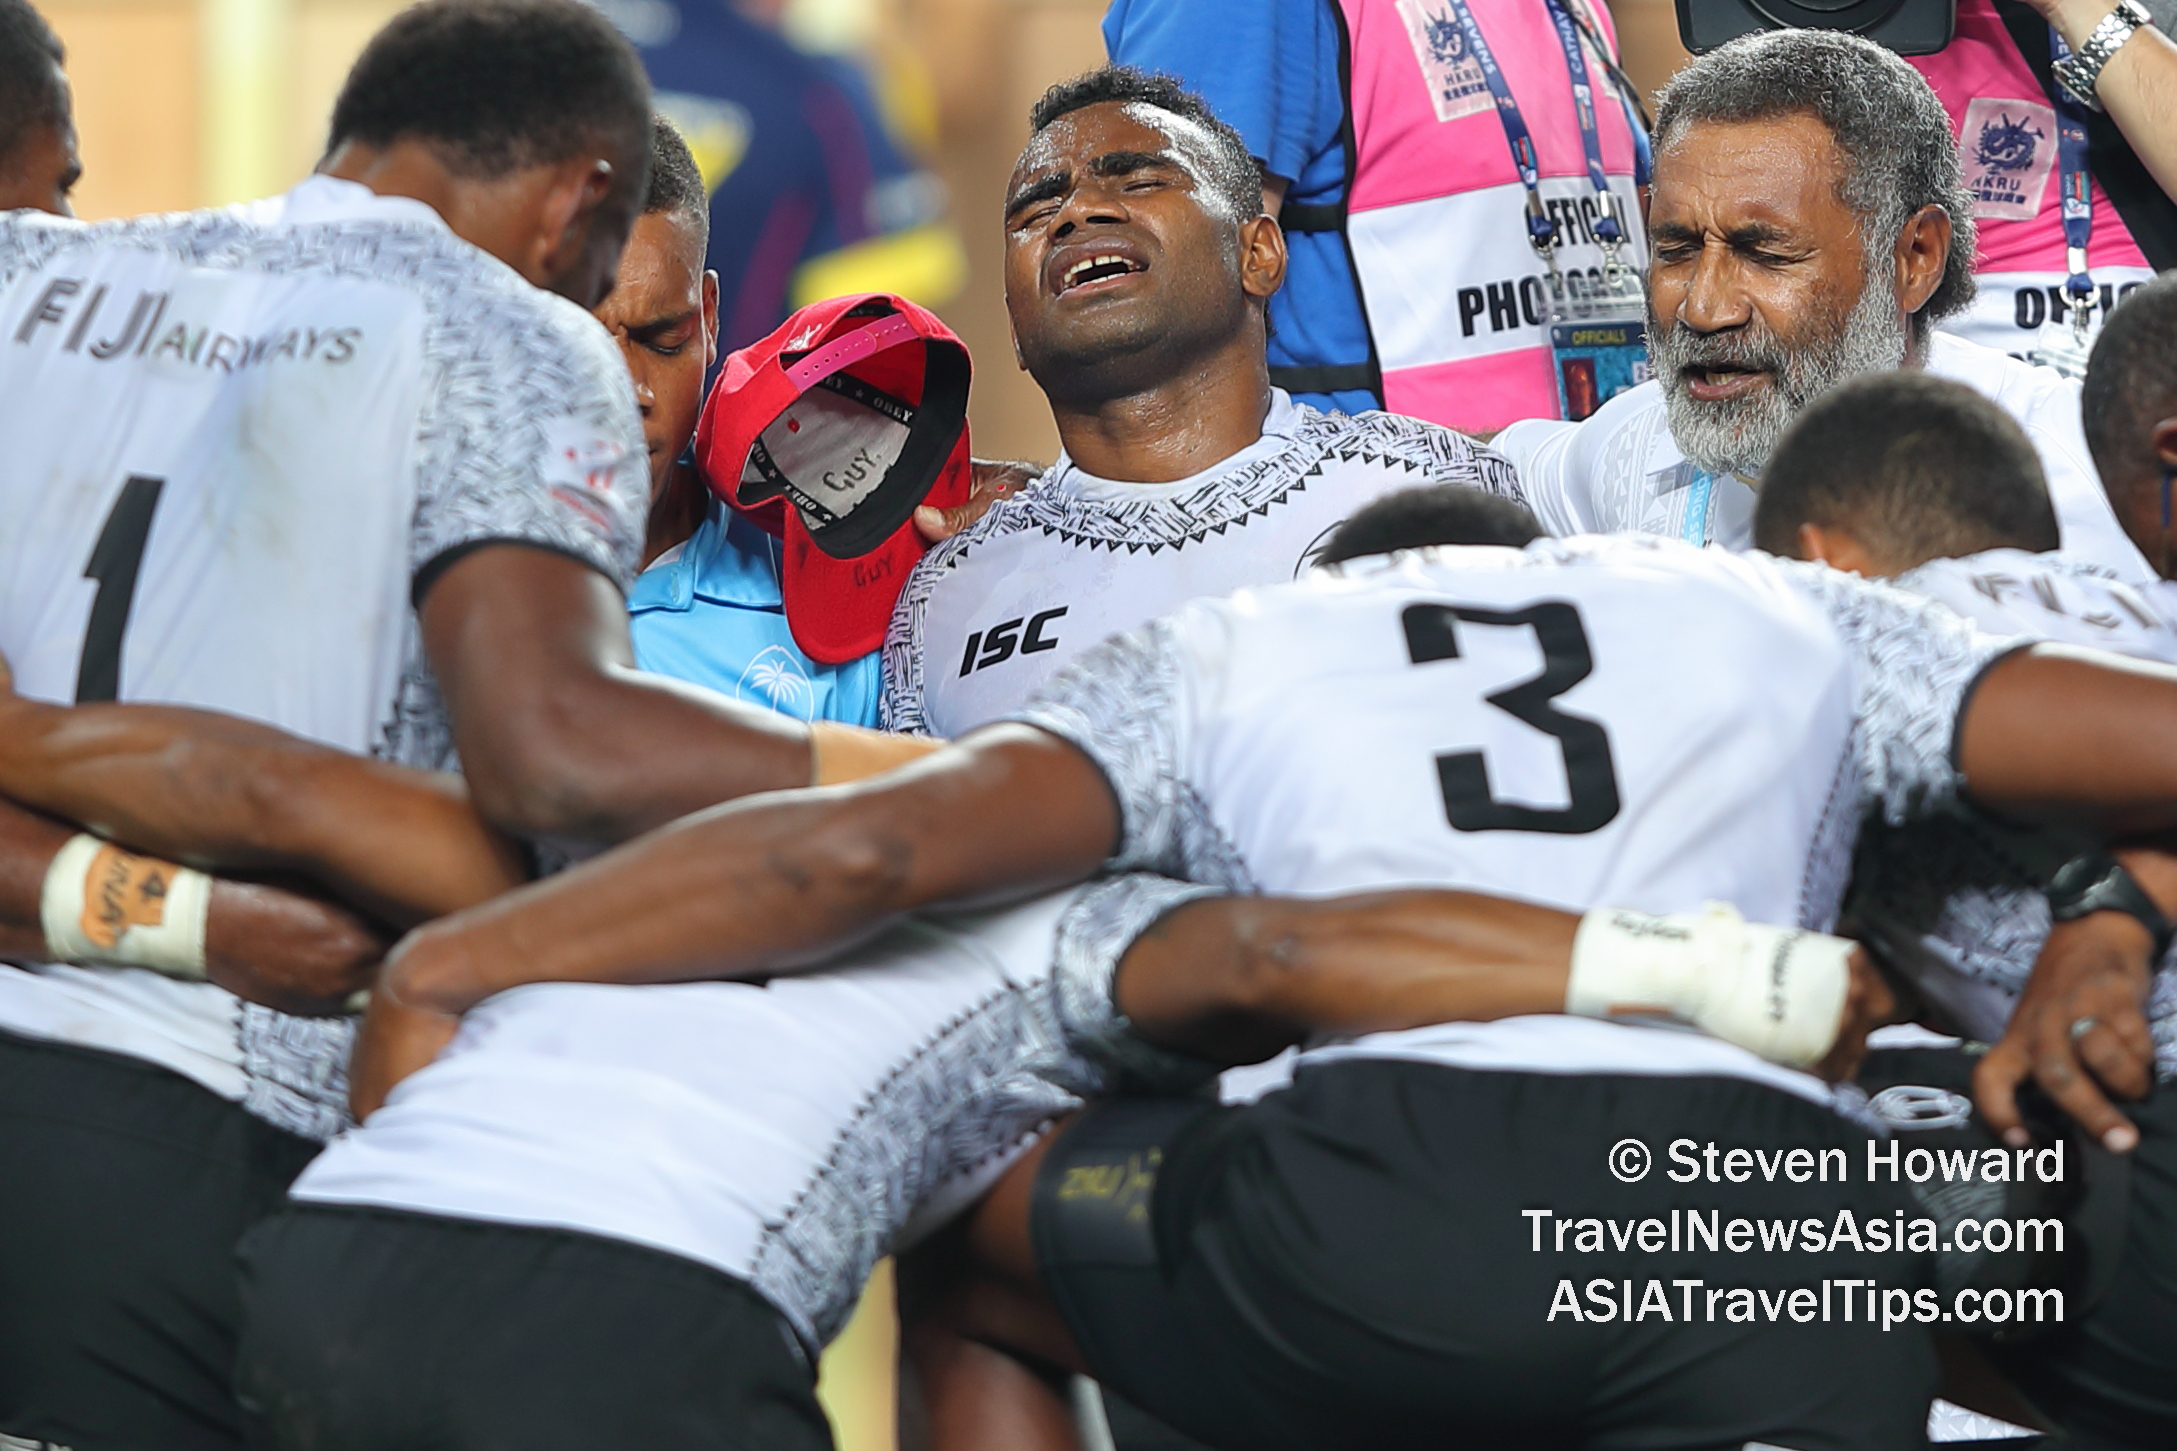 Rio 2016 Olympic champions Fiji celebrate winning the 5th consecutive Cathay Pacific / HSBC Hong Kong Sevens title in 2019. Picture by Steven Howard of TravelNewsAsia.com Click to enlarge.